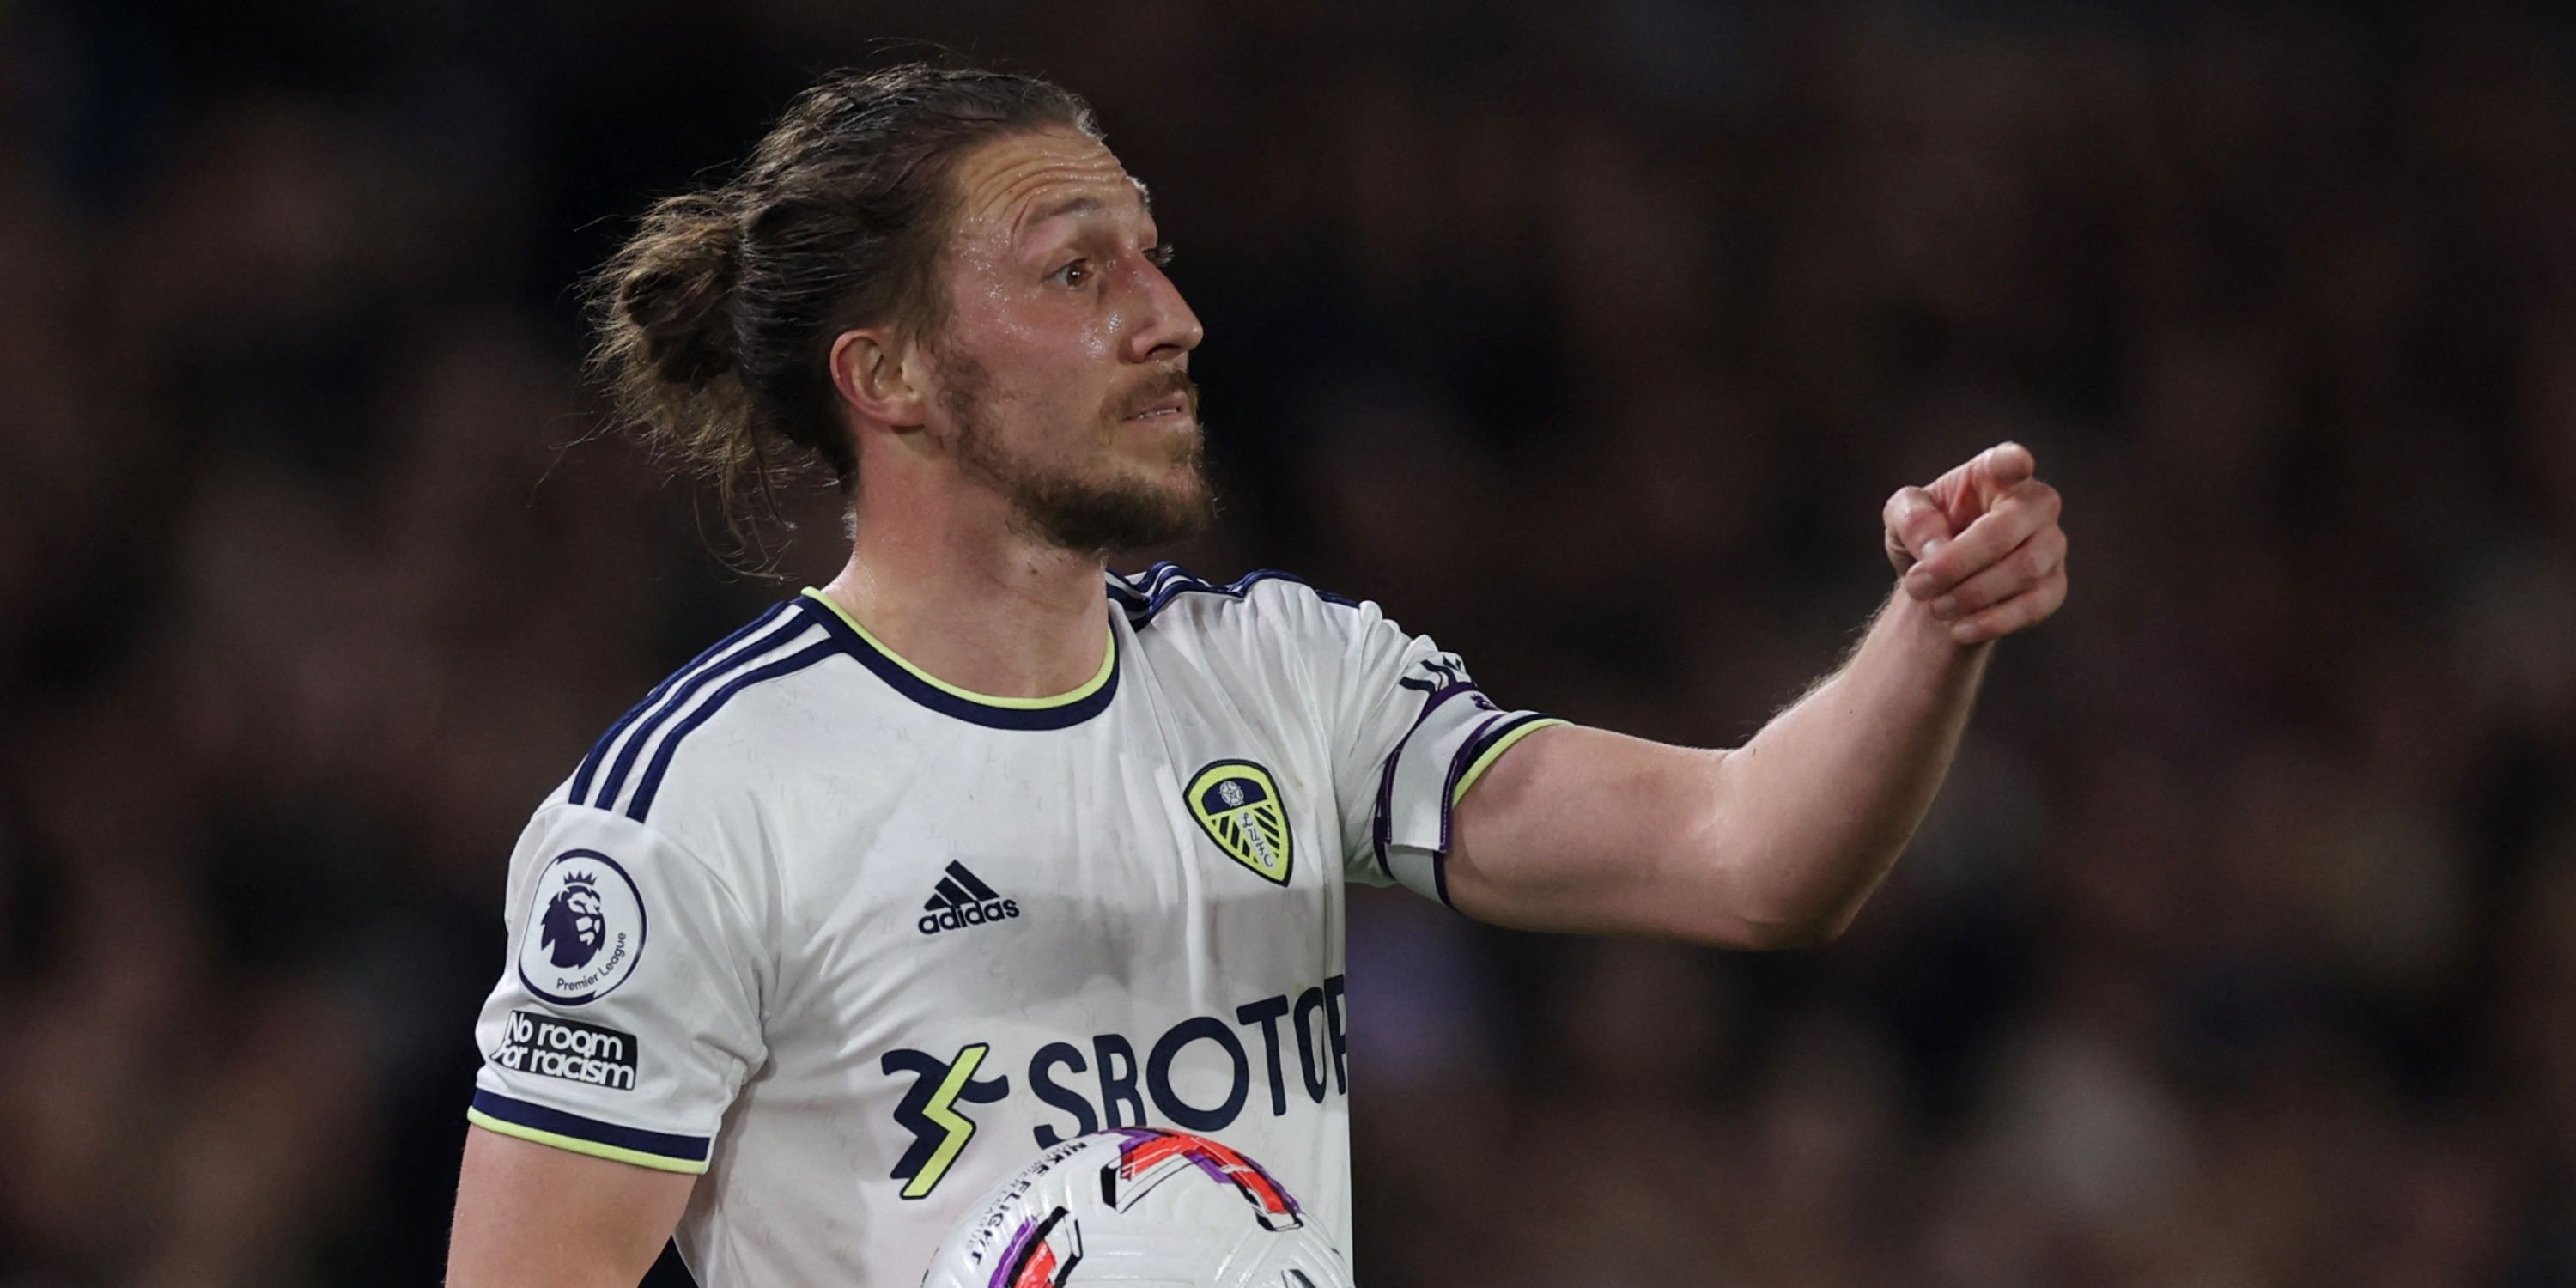 Fullback Luke Ayling admits Leeds United have lost their edge in